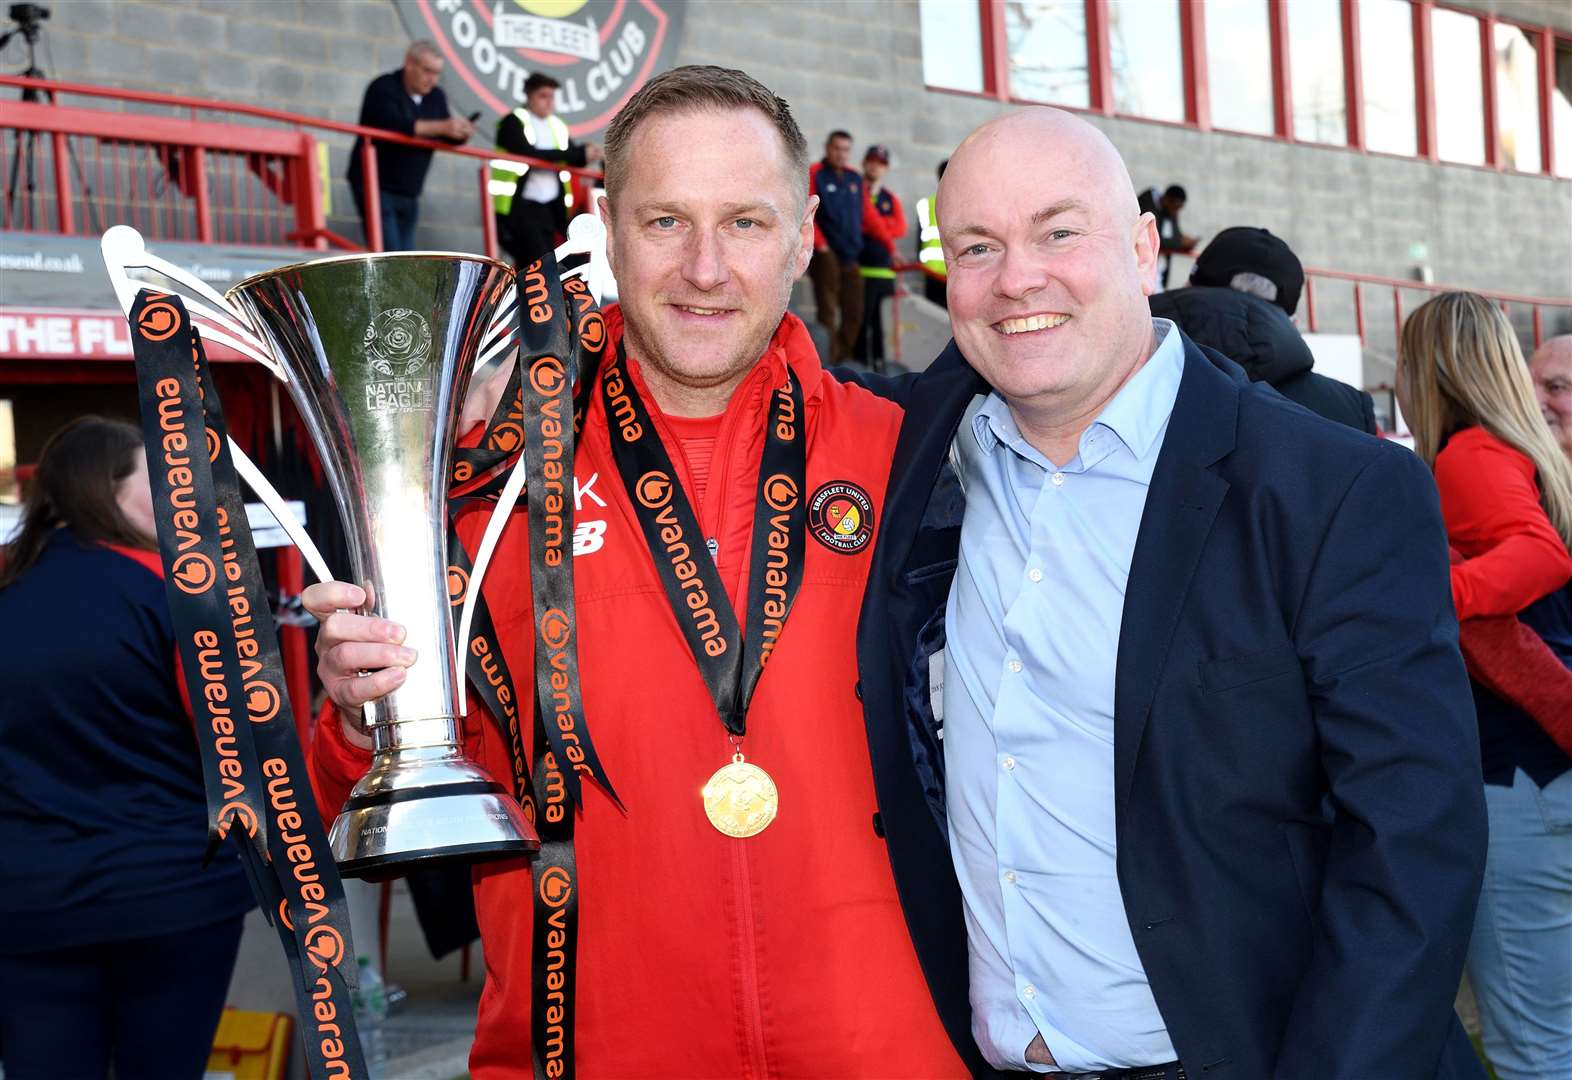 Ebbsfleet boss Dennis Kutrieb and chief executive Damian Irvine with the National League South trophy after Friday's win over Oxford City. Picture: Simon Hildrew